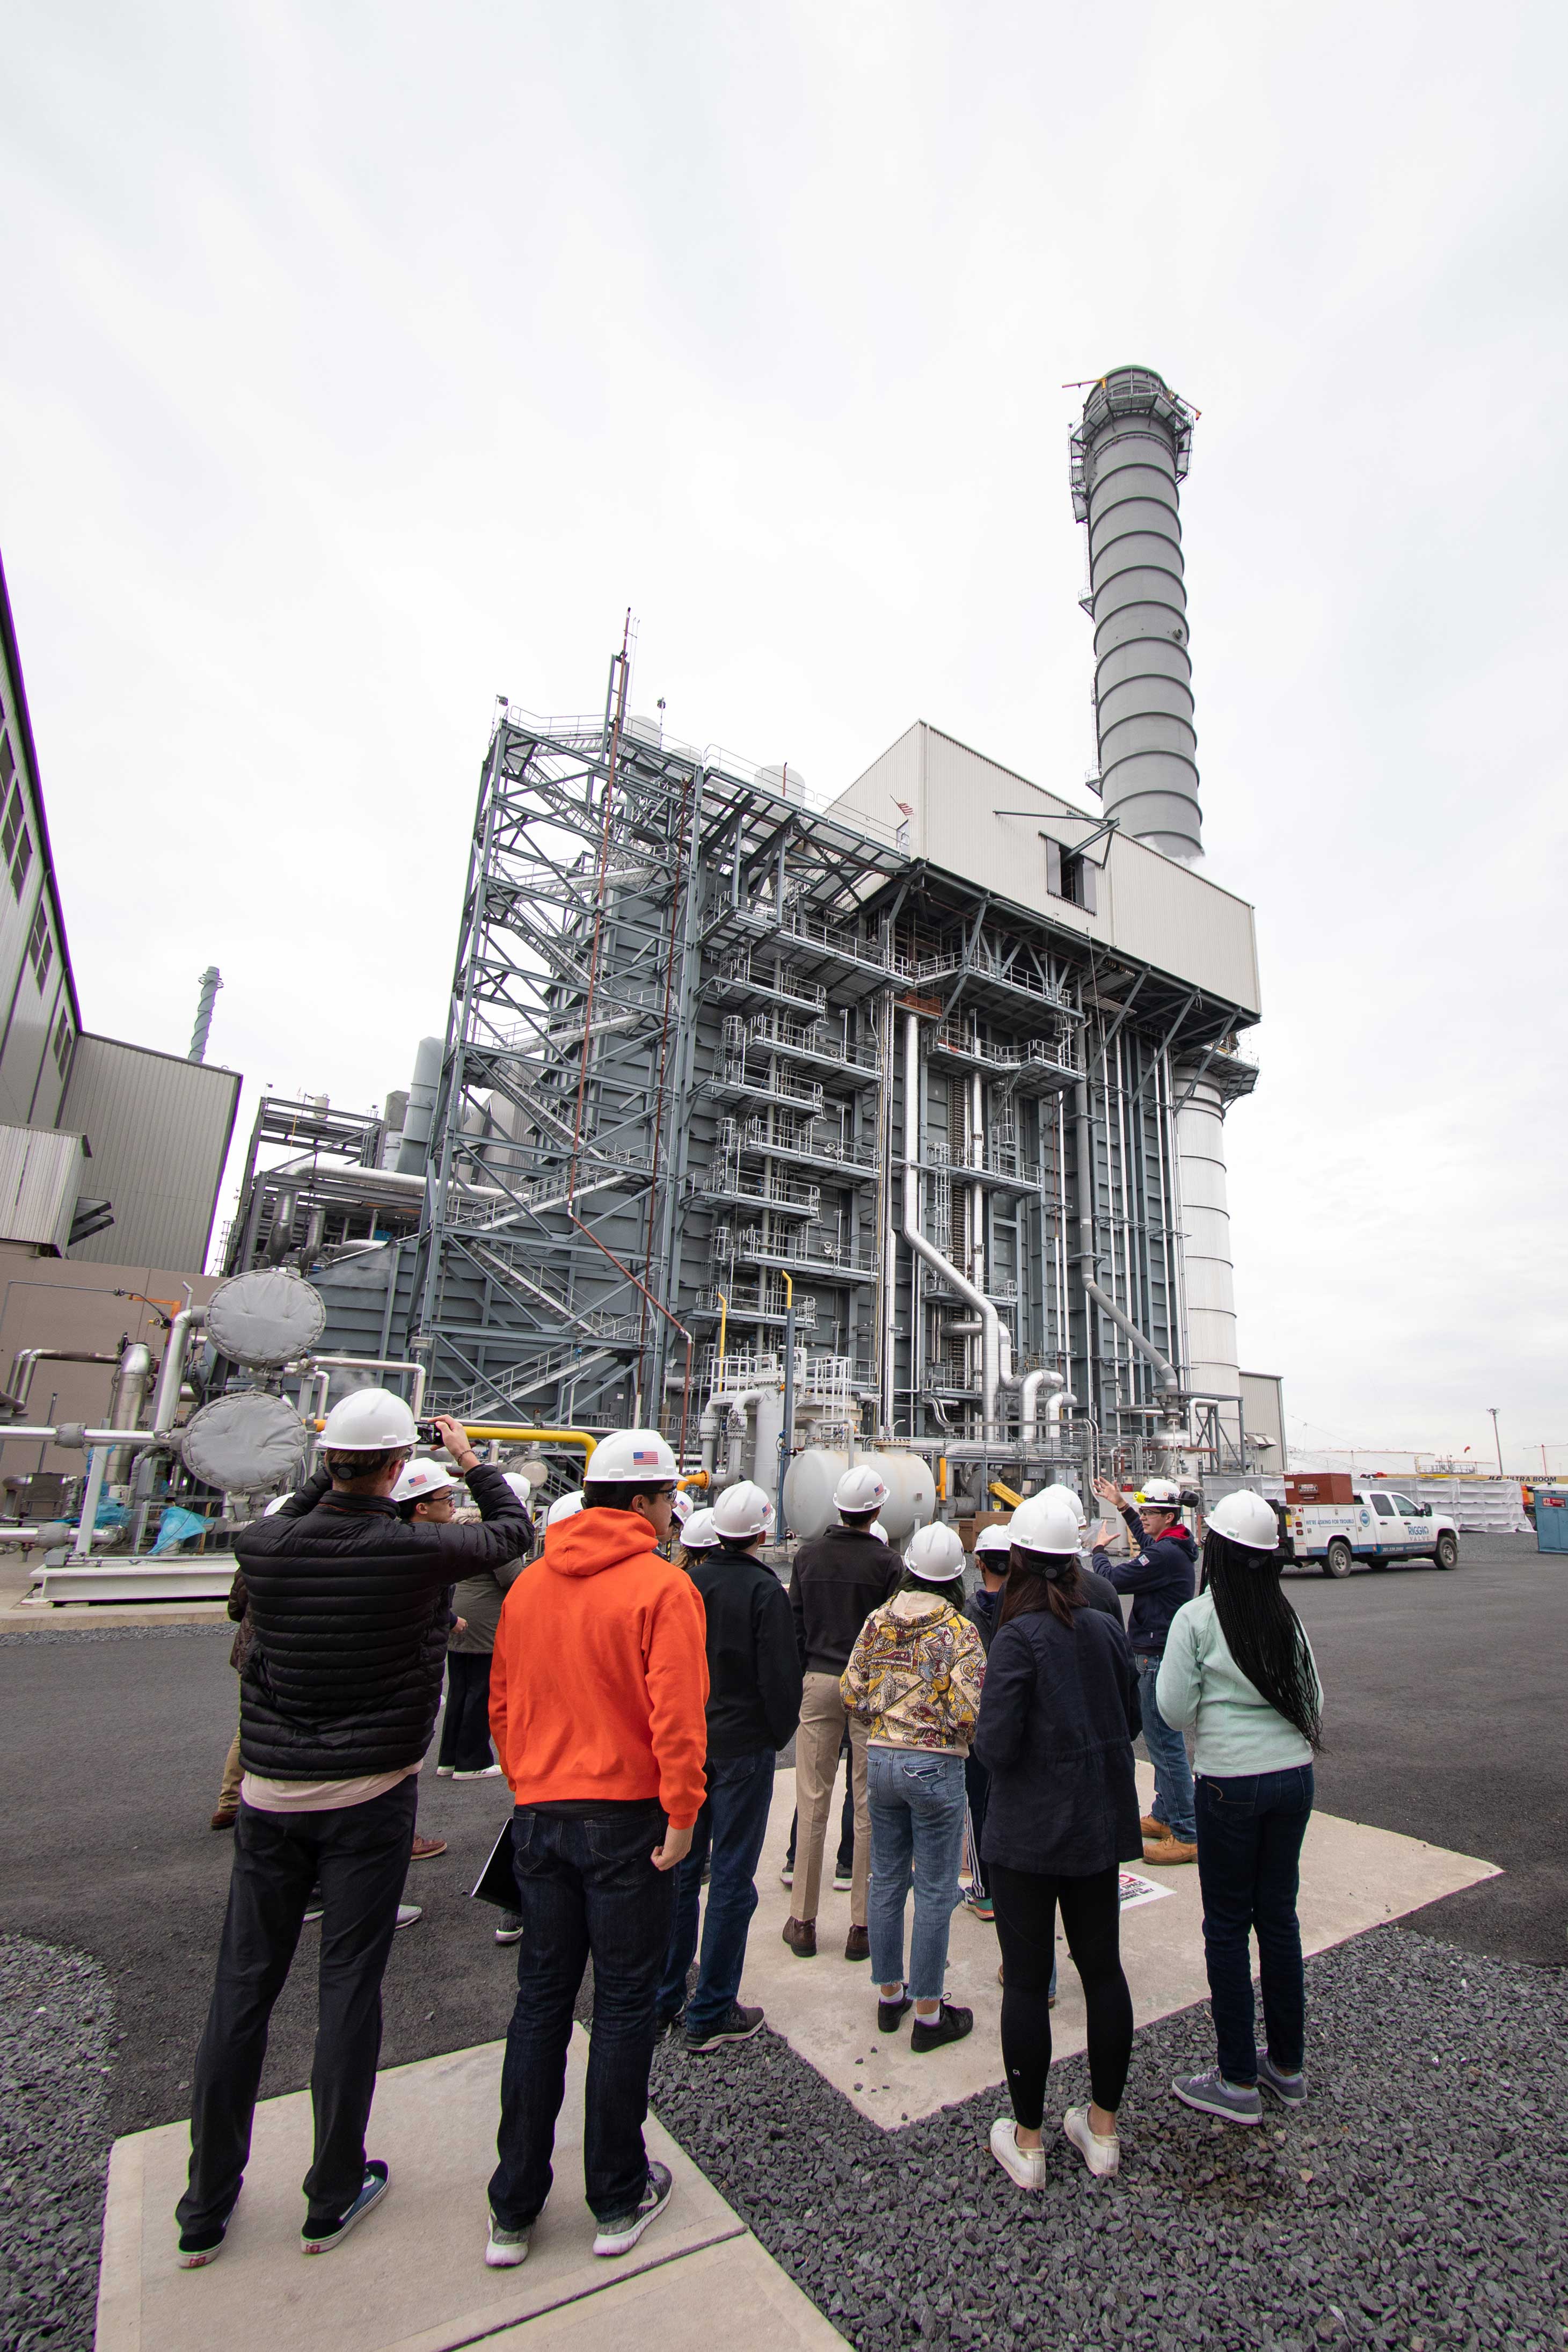 Students looking at large power plant structure